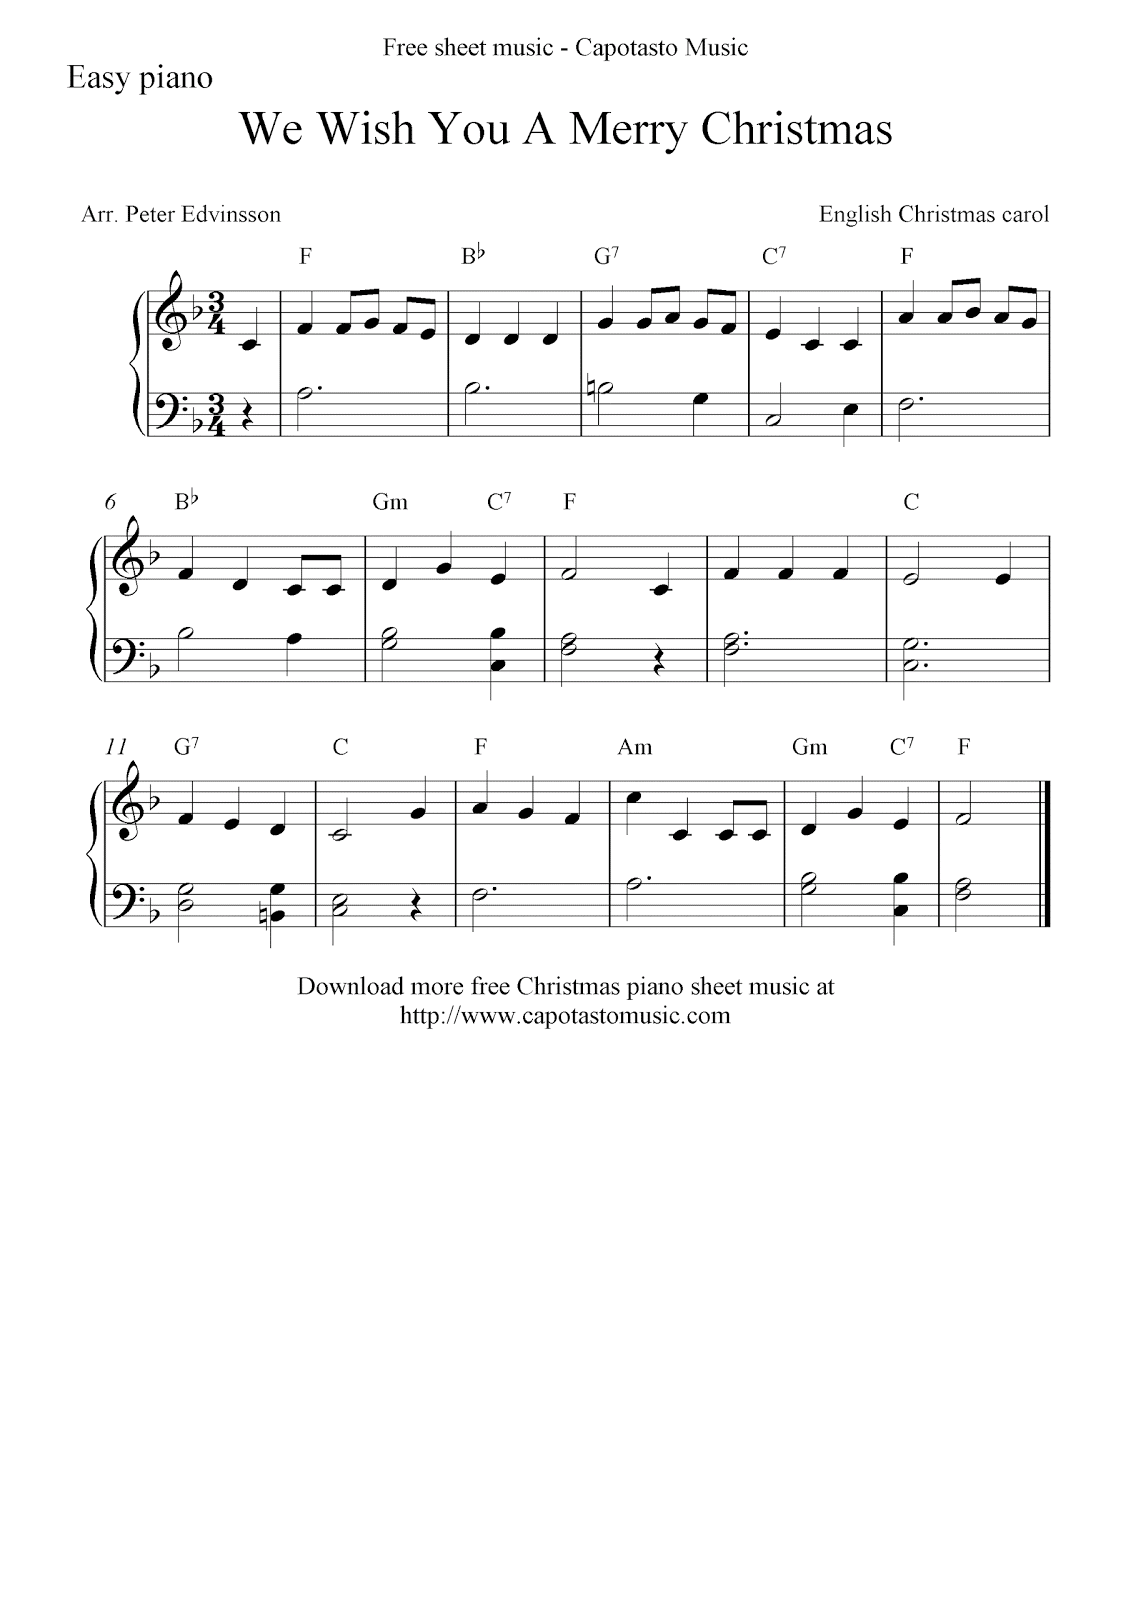 Free Christmas Sheet Music For Easy Piano We Wish You A Merry Christmas